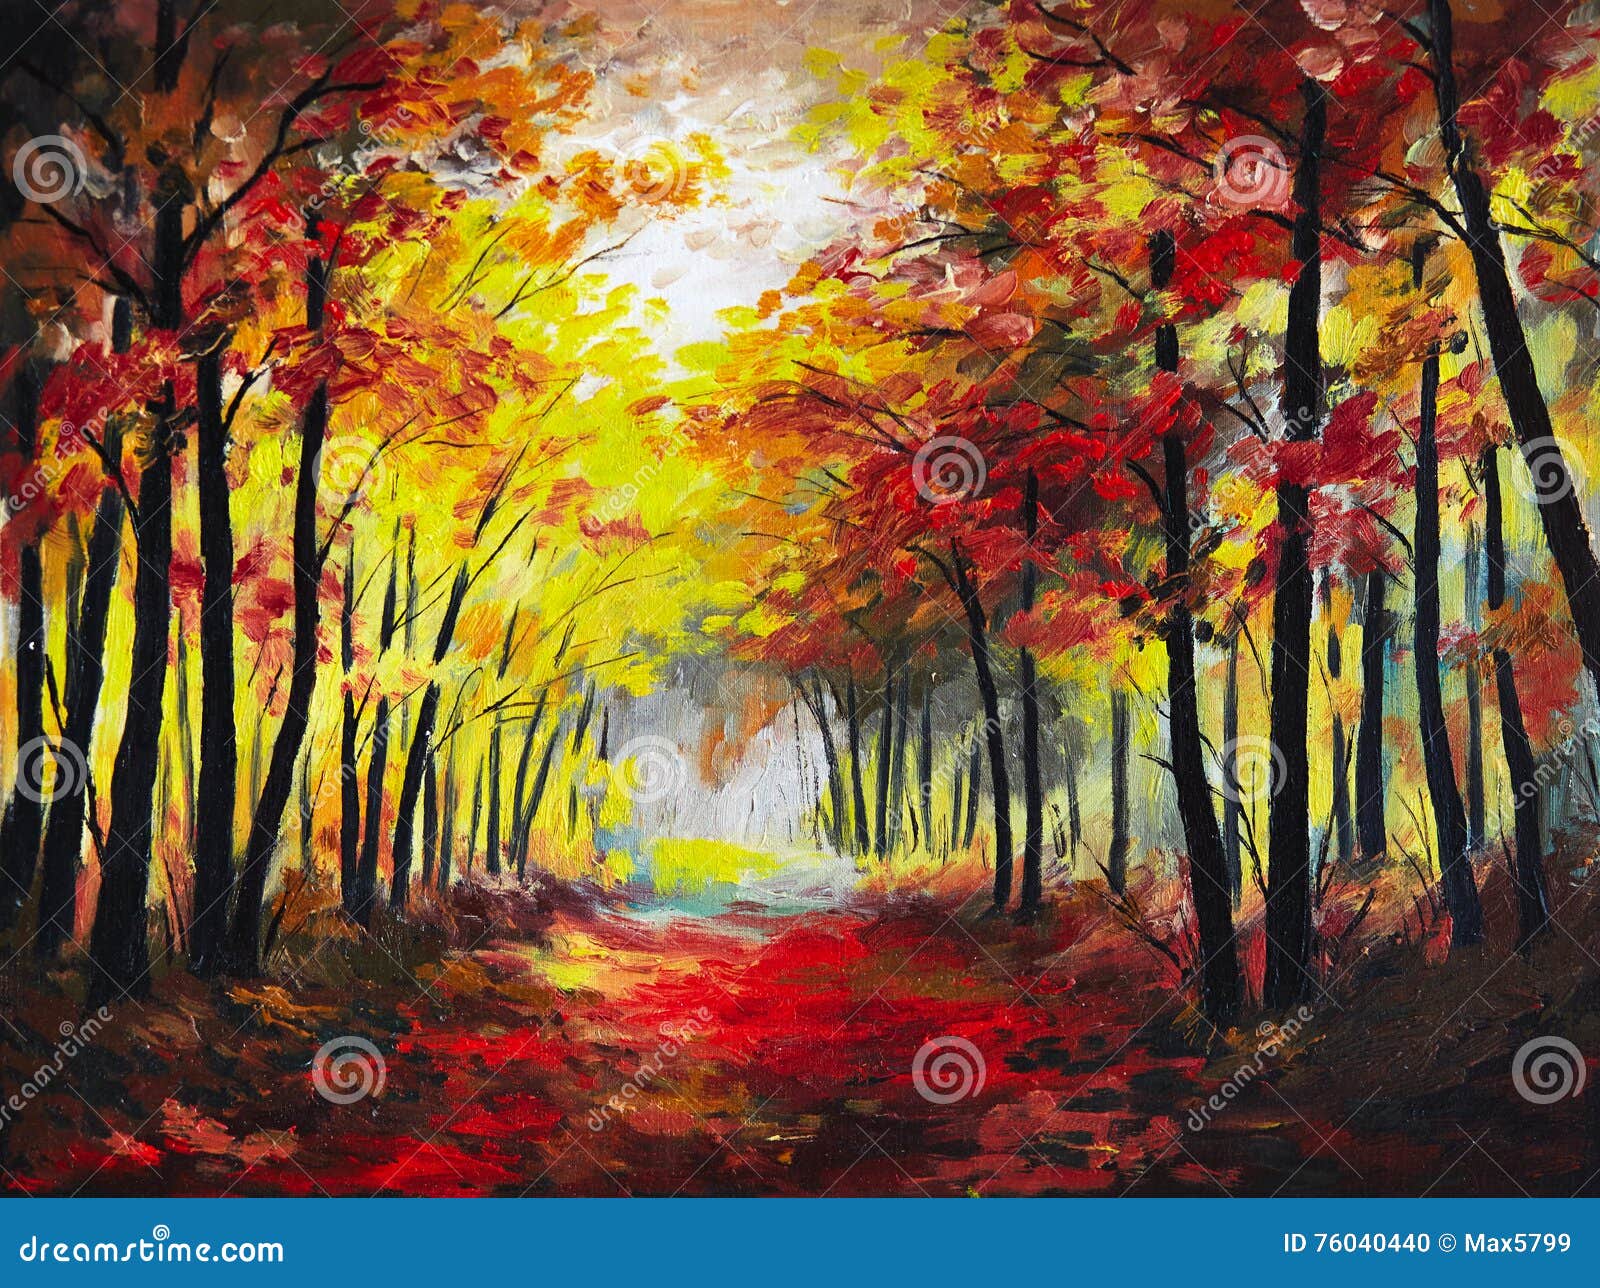 Oil Painting Landscape - Colorful Autumn Forest Stock Illustration ...